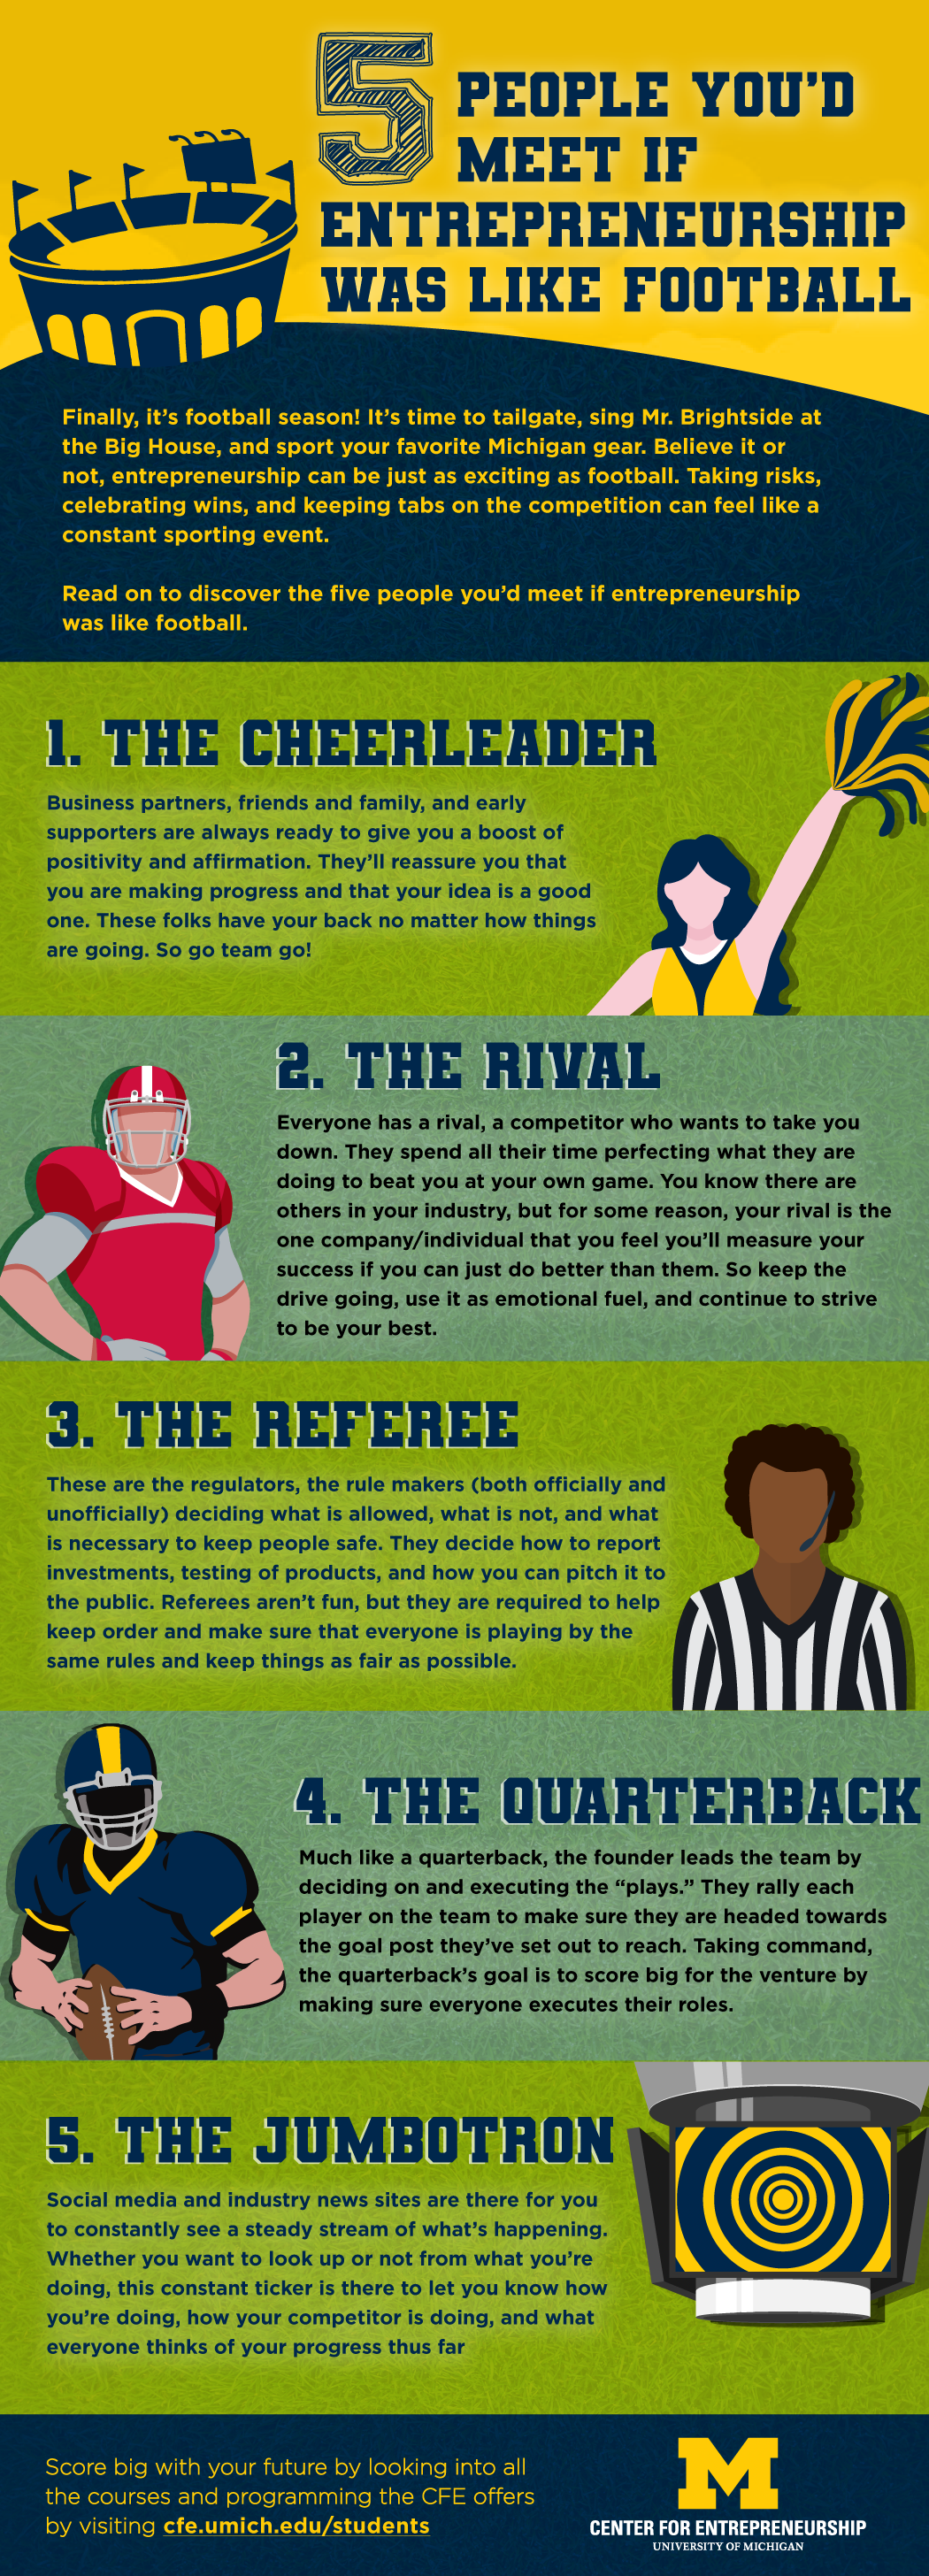 5 People You’d Meet If Entrepreneurship Was Like Football Finally, it’s football season! It’s time to tailgate, sing Mr. Brightside at the Big House, and sport your favorite Michigan gear. Believe it or not, entrepreneurship can be just as exciting as football. Taking risks, celebrating wins, and keeping tabs on the competition can feel like a constant sporting event. Read on to discover the five people you’d meet if entrepreneurship was like football. Cheerleader Business partners, friends and family, and early supporters are always ready to give you a boost of positivity and affirmation. They’ll reassure you that you are making progress and that your idea is a good one. These folks have your back no matter how things are going. So go team go! Rival Everyone has a rival, a competitor who wants to take you down. They spend all their time perfecting what they are doing to beat you at your own game. You know there are others in your industry, but for some reason, your rival is the one company/individual that you feel you’ll measure your success if you can just do better than them. So keep the drive going, use it as emotional fuel, and continue to strive to be your best. Referee These are the regulators, the rule makers (both officially and unofficially) deciding what is allowed, what is not, and what is necessary to keep people safe. They decide how to report investments, testing of products, and how you can pitch it to the public. Referees aren’t fun, but they are required to help keep order and make sure that everyone is playing by the same rules and keep things as fair as possible. Quarterback Much like a quarterback, the founder leads the team by deciding on and executing the “plays.” They rally each player on the team to make sure they are headed towards the goal post they’ve set out to reach. Taking command, the quarterback’s goal is to score big for the venture by making sure everyone executes their roles. Jumbotron Social media and industry news sites are there for you to constantly see a steady stream of what’s happening. Whether you want to look up or not from what you’re doing, this constant ticker is there to let you know how you’re doing, how your competitor is doing, and what everyone thinks of your progress thus far.